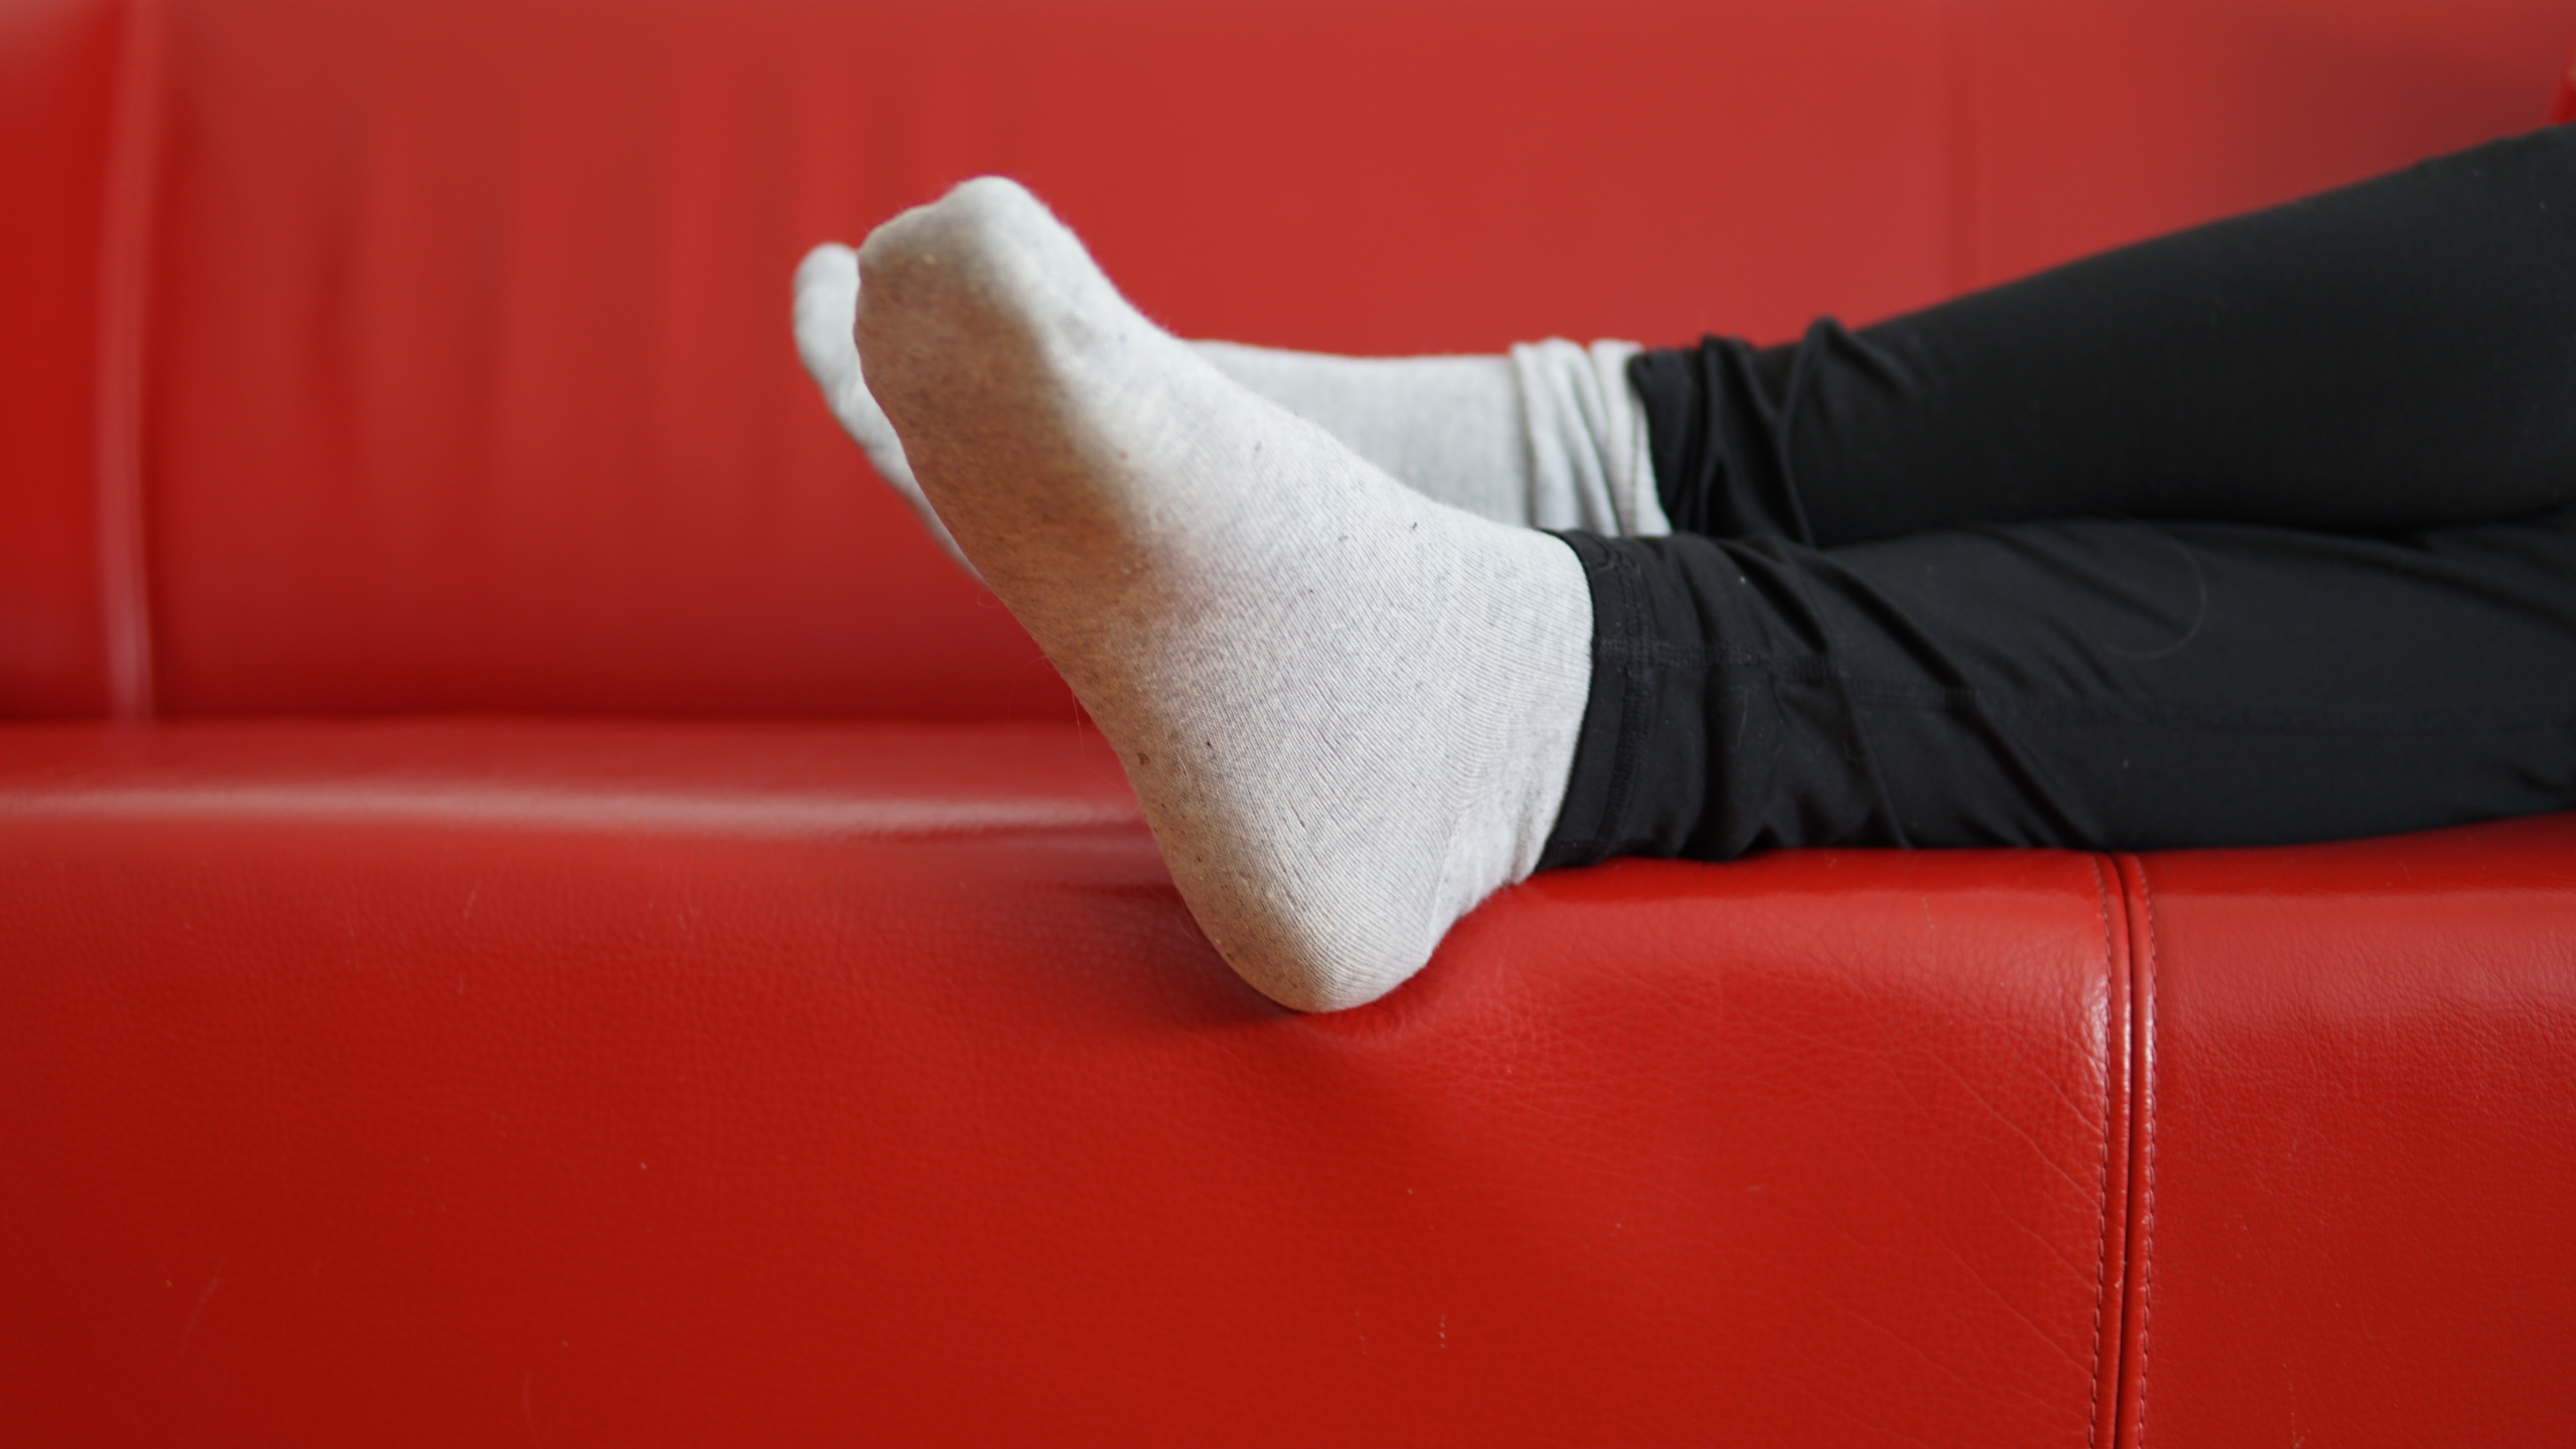 Feet Feet Crossed Socks White Socks Short Socks Red Couch Couch Leather Couch Black Legwear Foot Sol 6000x3376